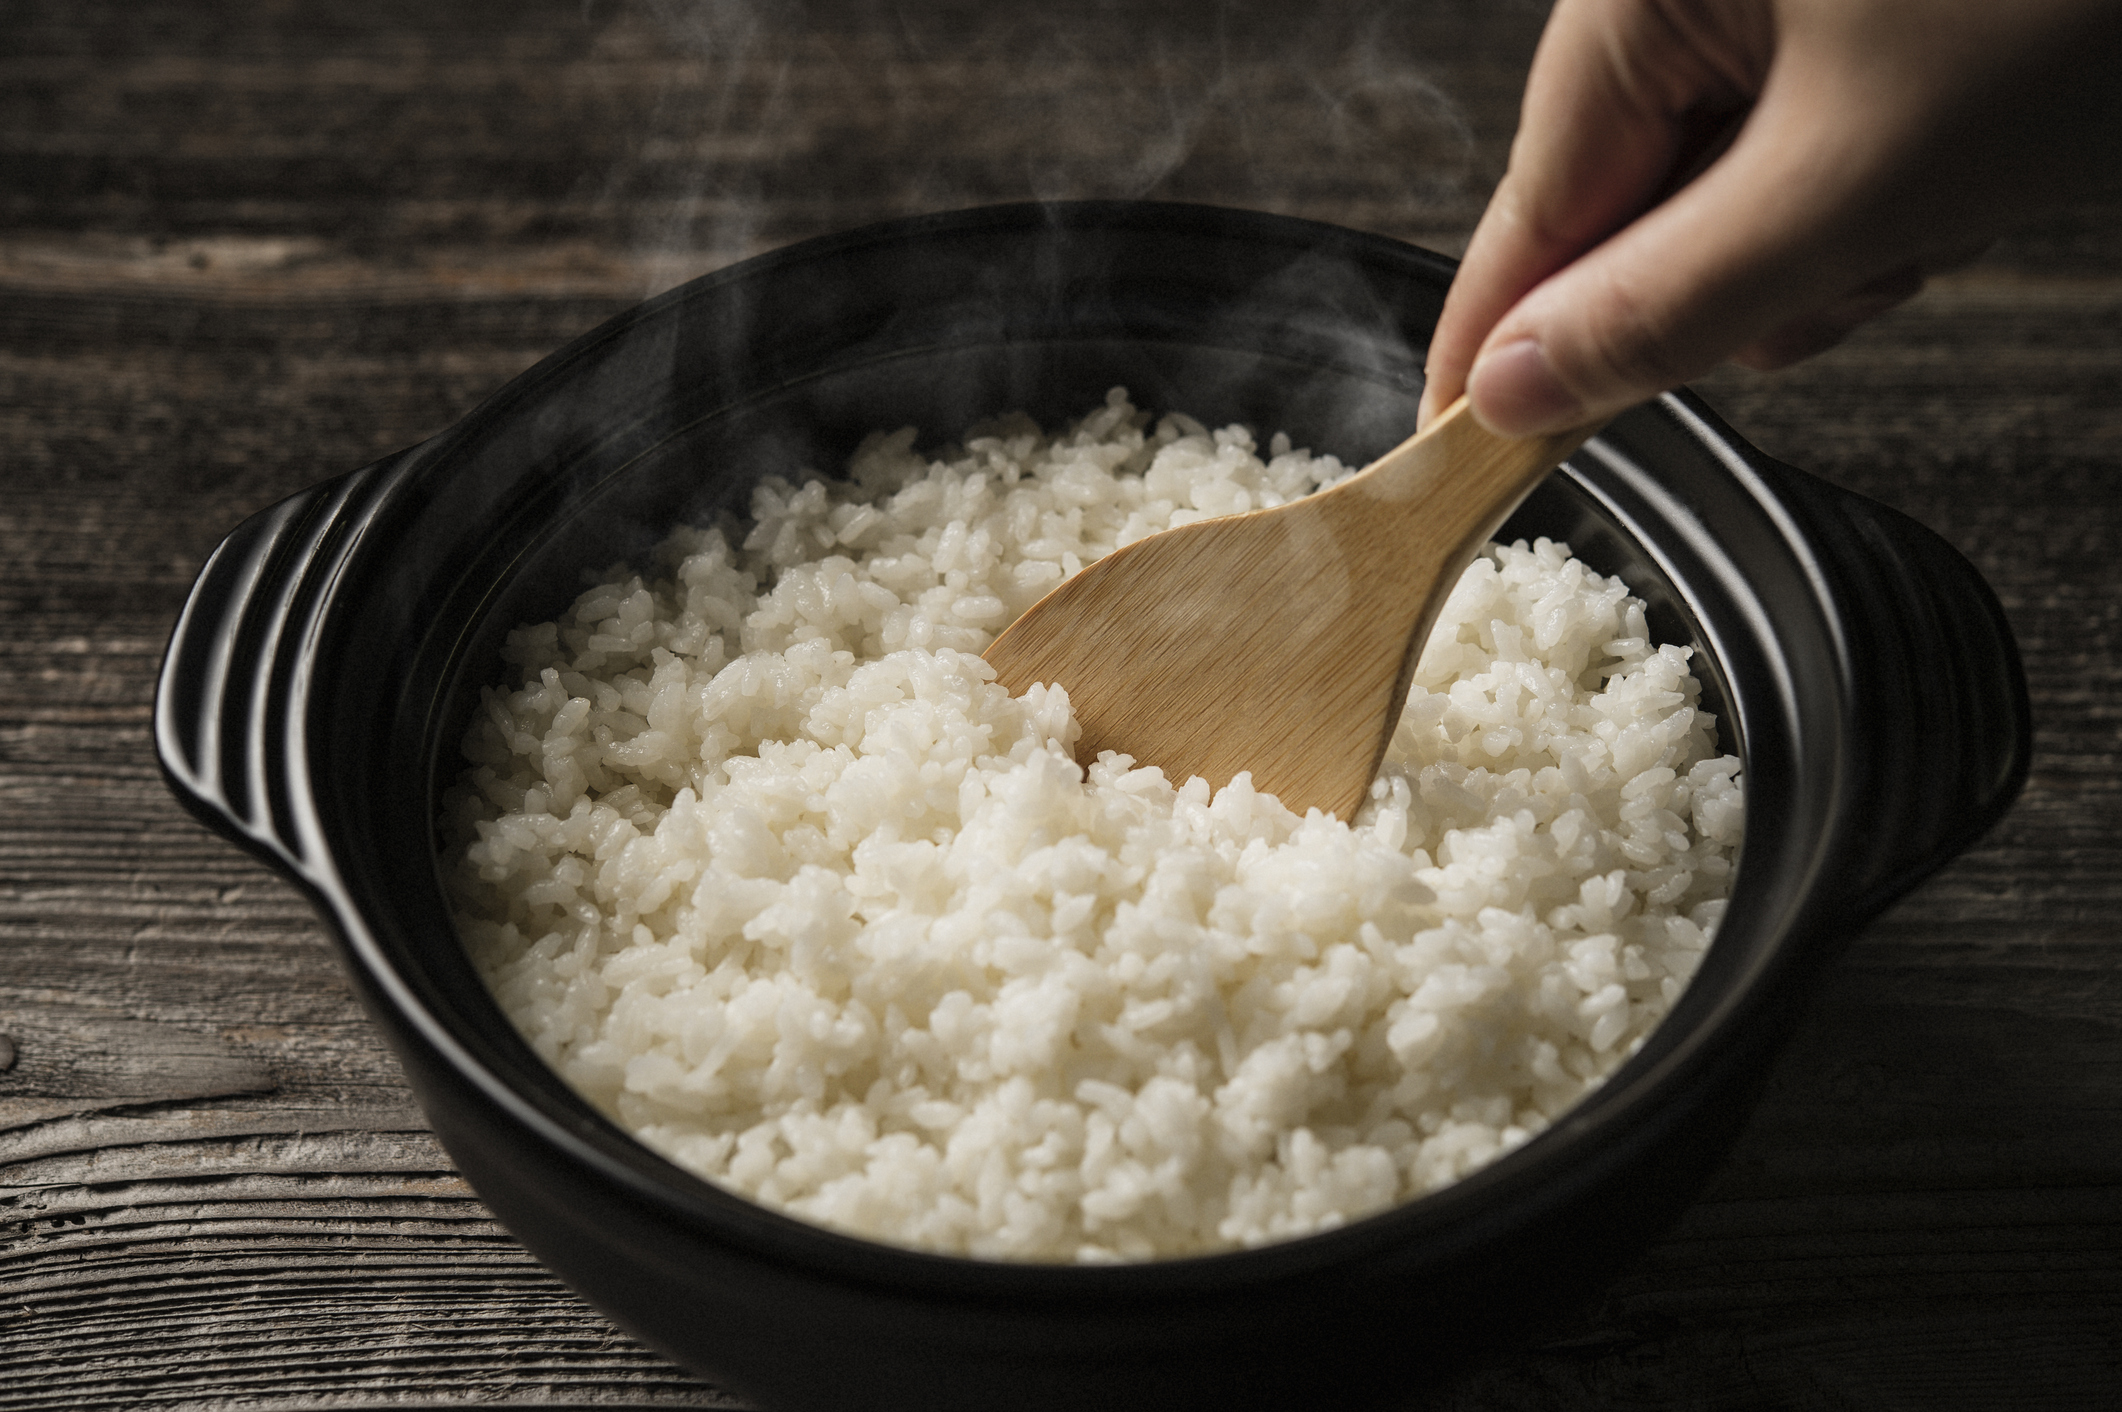 How to Reheat Rice Perfectly So You Can Keep It Fluffy - The Manual